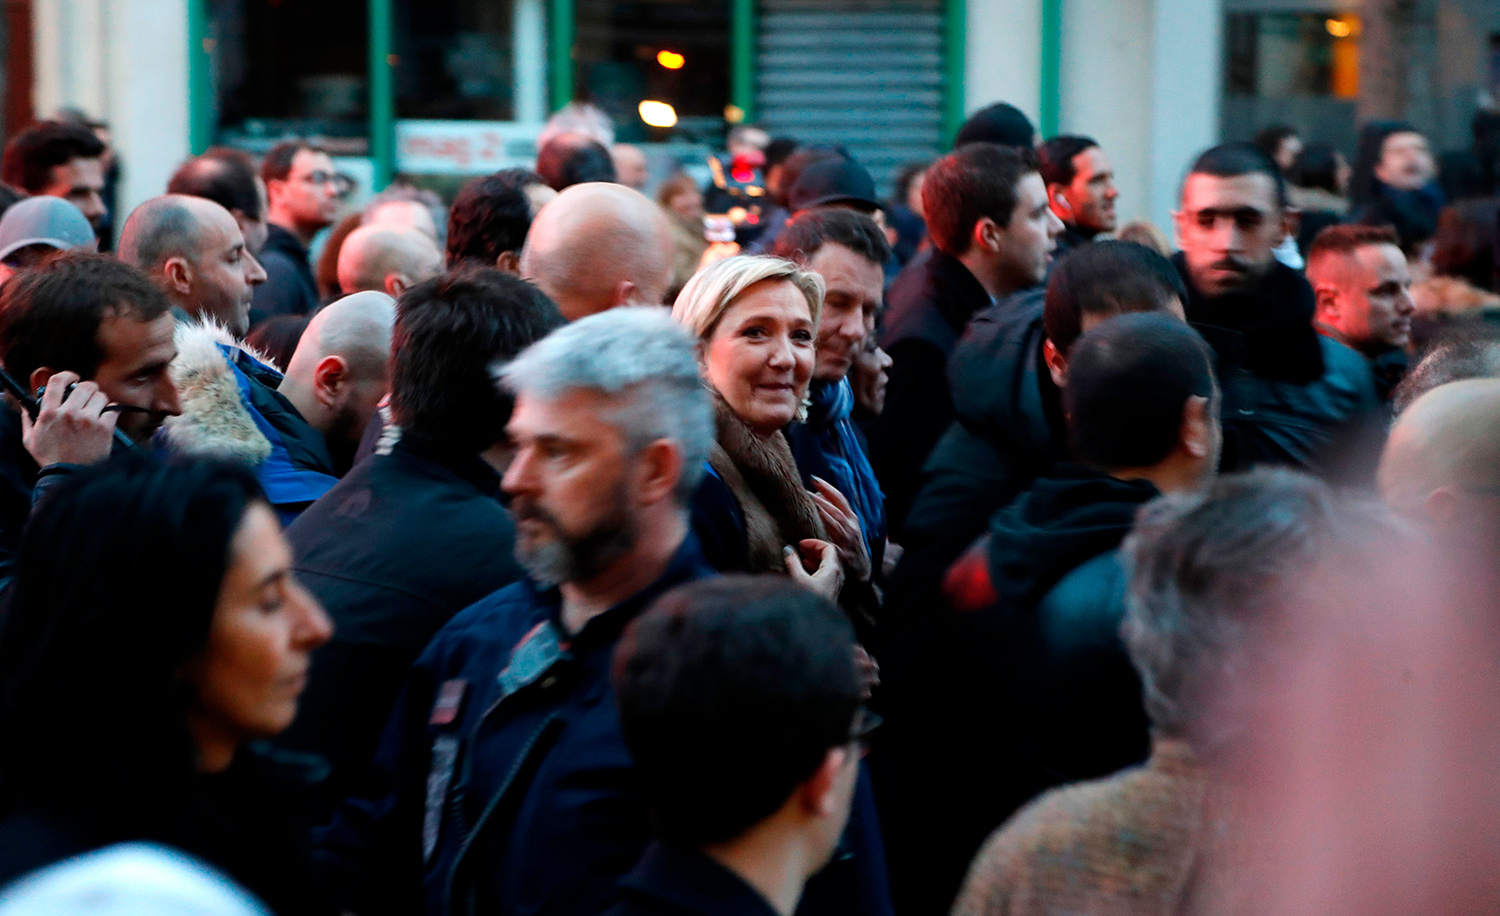 Marine Le Pen, president of the French far-right Front National party, in Paris on March 28, 2018, during a silent march in memory of Mireille Knoll, an 85-year-old Jewish woman murdered in her home in an anti-Semitic attack. FRANCOIS GUILLOT/AFP via Getty Images.
